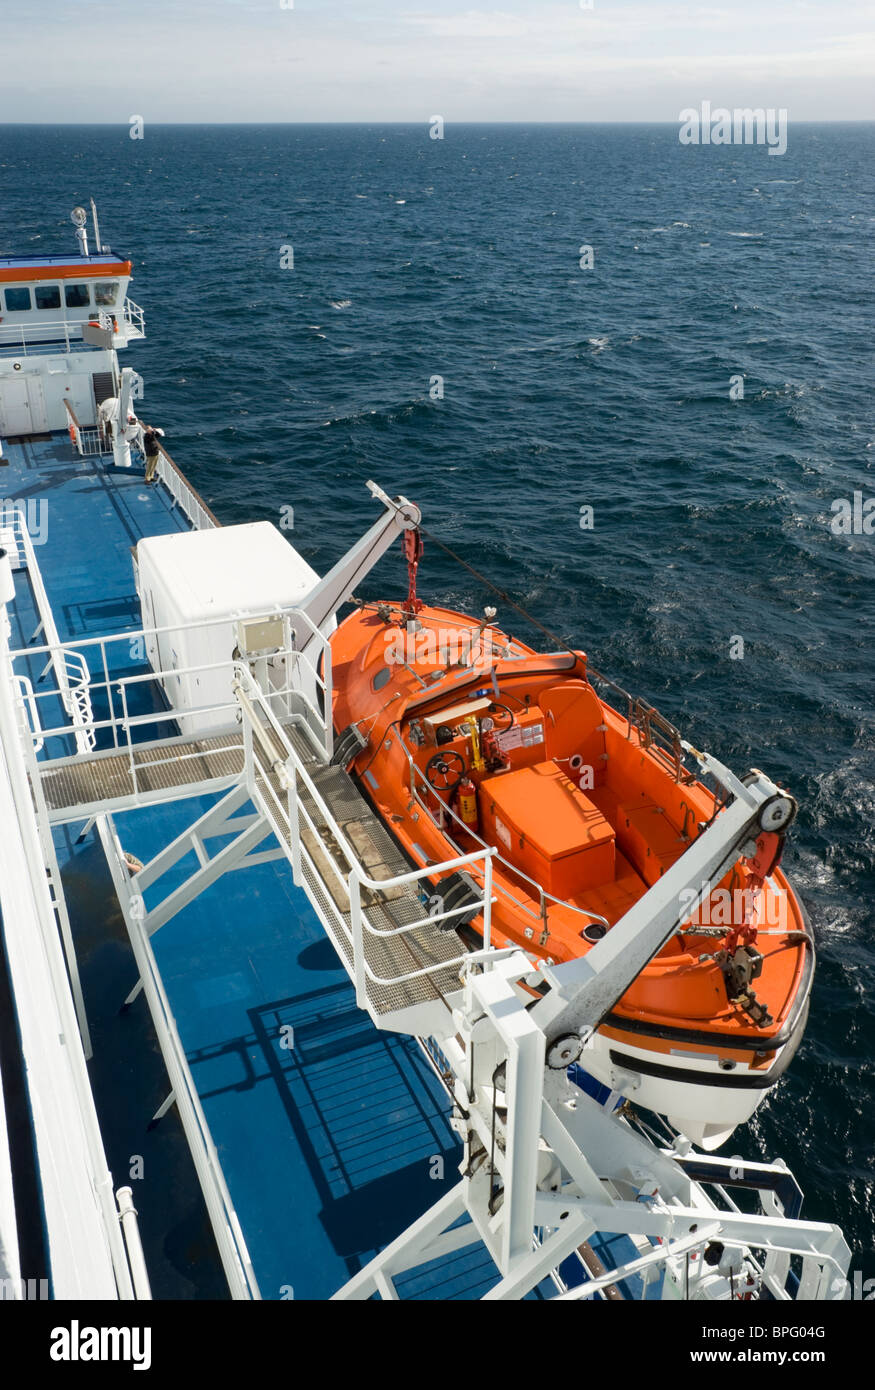 Lifeboat on a passenger cruise ship. High angle view. Stock Photo